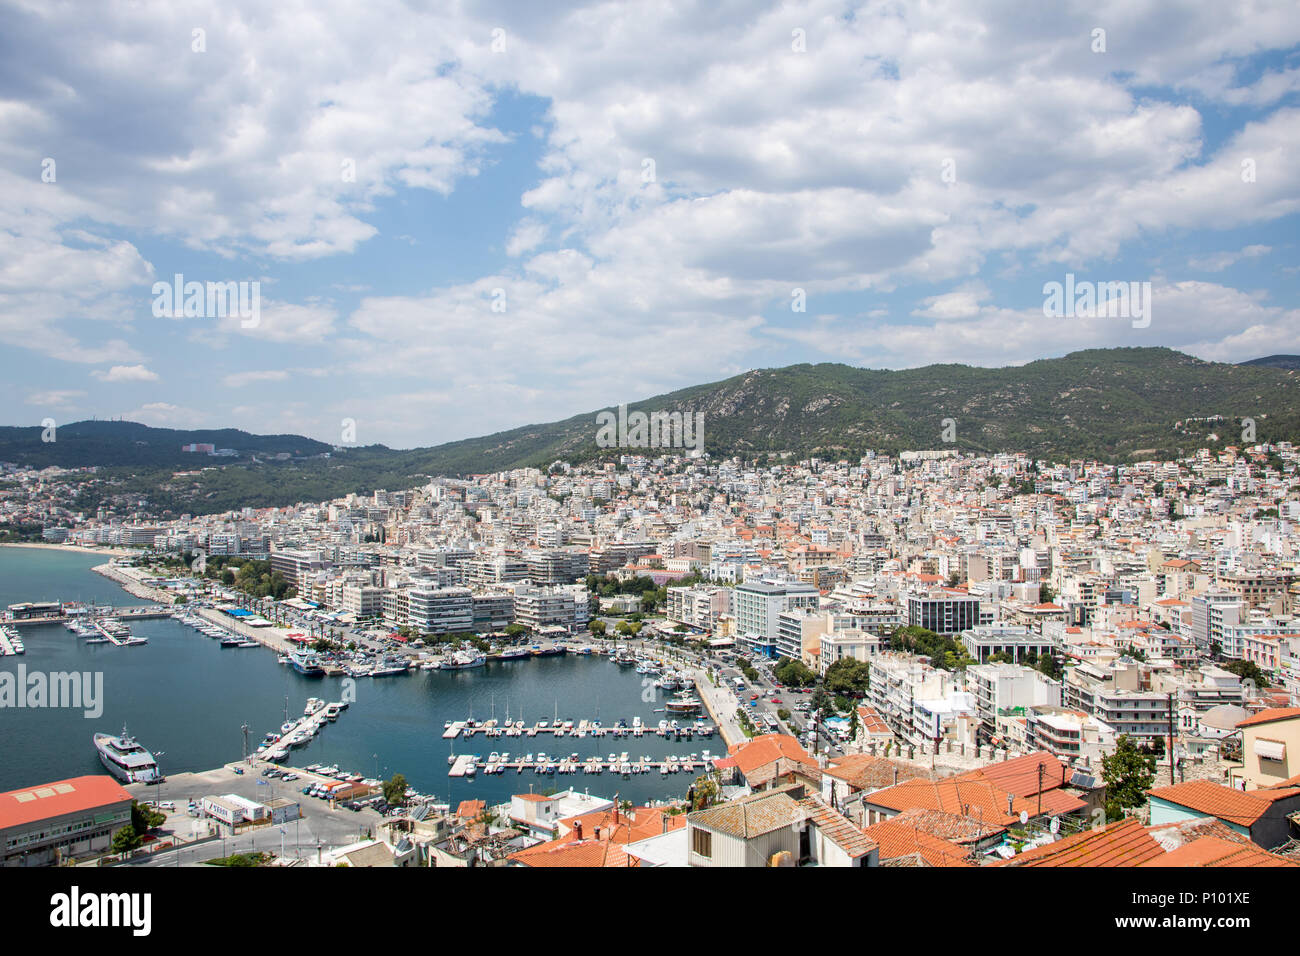 Old town and port of Kavala, Greece Stock Photo